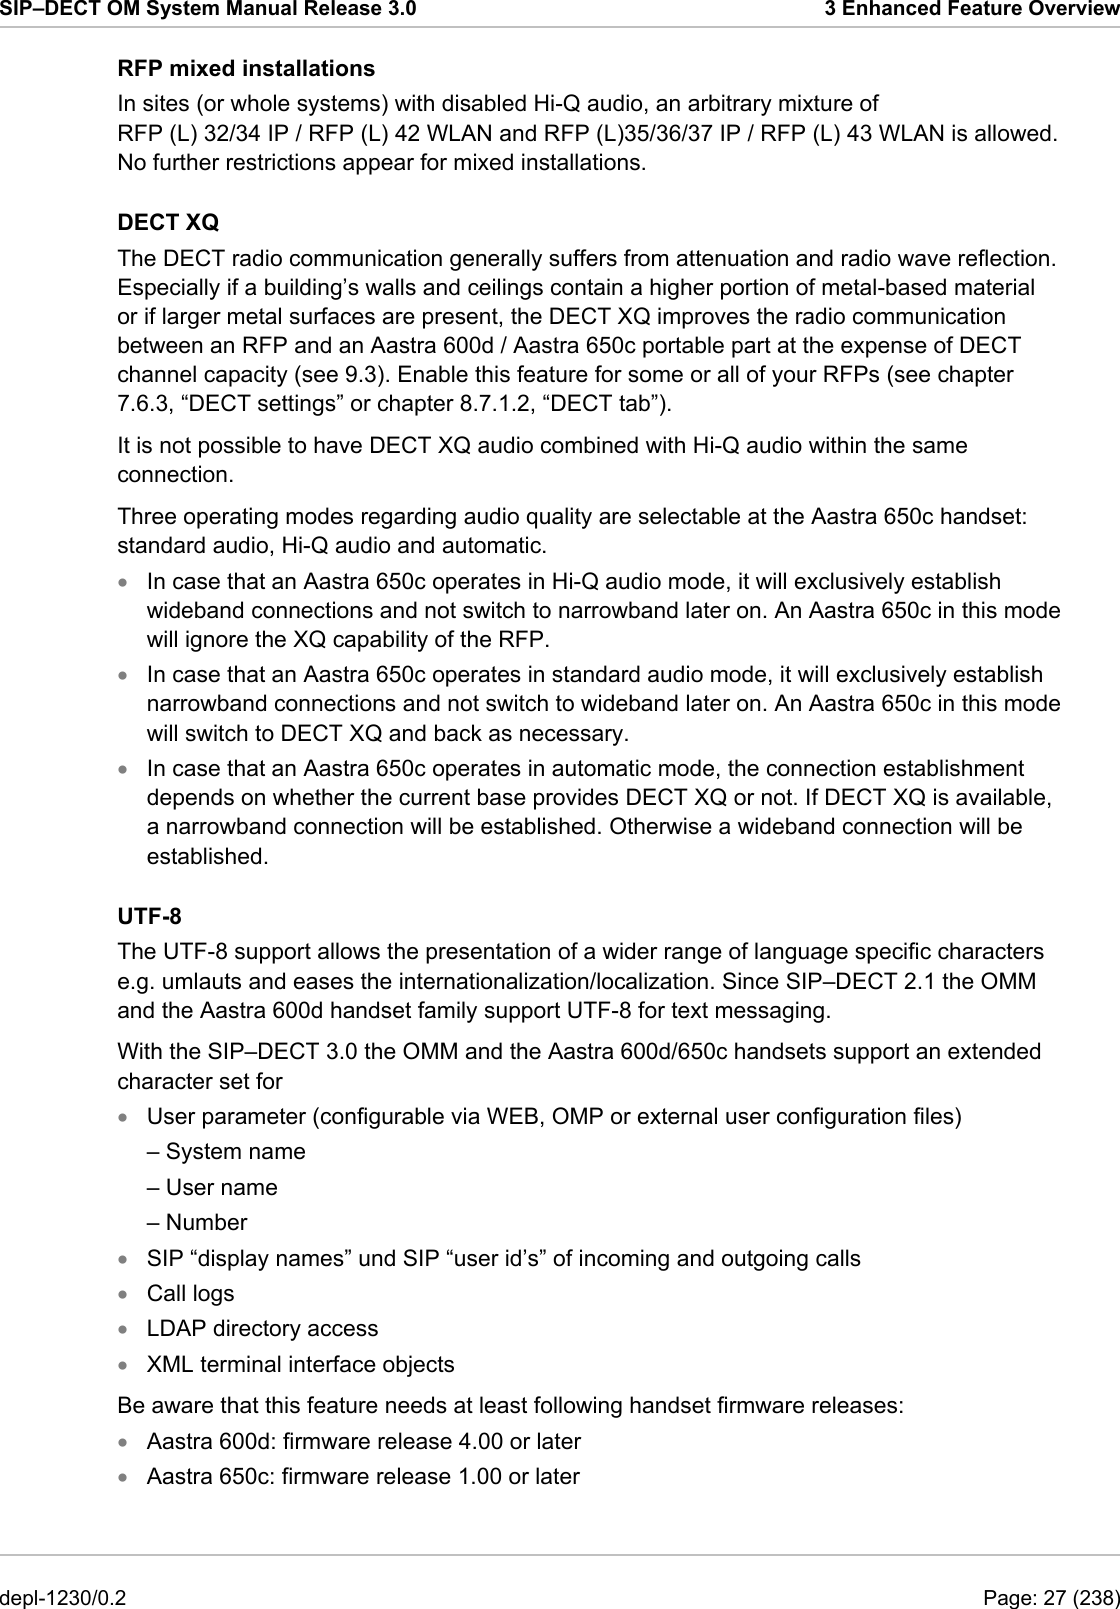 SIP–DECT OM System Manual Release 3.0  3 Enhanced Feature Overview RFP mixed installations In sites (or whole systems) with disabled Hi-Q audio, an arbitrary mixture of RFP (L) 32/34 IP / RFP (L) 42 WLAN and RFP (L)35/36/37 IP / RFP (L) 43 WLAN is allowed. No further restrictions appear for mixed installations. DECT XQ The DECT radio communication generally suffers from attenuation and radio wave reflection. Especially if a building’s walls and ceilings contain a higher portion of metal-based material or if larger metal surfaces are present, the DECT XQ improves the radio communication between an RFP and an Aastra 600d / Aastra 650c portable part at the expense of DECT channel capacity (see 9.3). Enable this feature for some or all of your RFPs (see chapter 7.6.3, “DECT settings” or chapter 8.7.1.2, “DECT tab”). It is not possible to have DECT XQ audio combined with Hi-Q audio within the same connection. Three operating modes regarding audio quality are selectable at the Aastra 650c handset: standard audio, Hi-Q audio and automatic. In case that an Aastra 650c operates in Hi-Q audio mode, it will exclusively establish wideband connections and not switch to narrowband later on. An Aastra 650c in this mode will ignore the XQ capability of the RFP. • • • • • • • • • • In case that an Aastra 650c operates in standard audio mode, it will exclusively establish narrowband connections and not switch to wideband later on. An Aastra 650c in this mode will switch to DECT XQ and back as necessary. In case that an Aastra 650c operates in automatic mode, the connection establishment depends on whether the current base provides DECT XQ or not. If DECT XQ is available, a narrowband connection will be established. Otherwise a wideband connection will be established. UTF-8 The UTF-8 support allows the presentation of a wider range of language specific characters e.g. umlauts and eases the internationalization/localization. Since SIP–DECT 2.1 the OMM and the Aastra 600d handset family support UTF-8 for text messaging. With the SIP–DECT 3.0 the OMM and the Aastra 600d/650c handsets support an extended character set for  User parameter (configurable via WEB, OMP or external user configuration files) – System name – User name – Number SIP “display names” und SIP “user id’s” of incoming and outgoing calls Call logs LDAP directory access XML terminal interface objects Be aware that this feature needs at least following handset firmware releases: Aastra 600d: firmware release 4.00 or later Aastra 650c: firmware release 1.00 or later depl-1230/0.2  Page: 27 (238) 